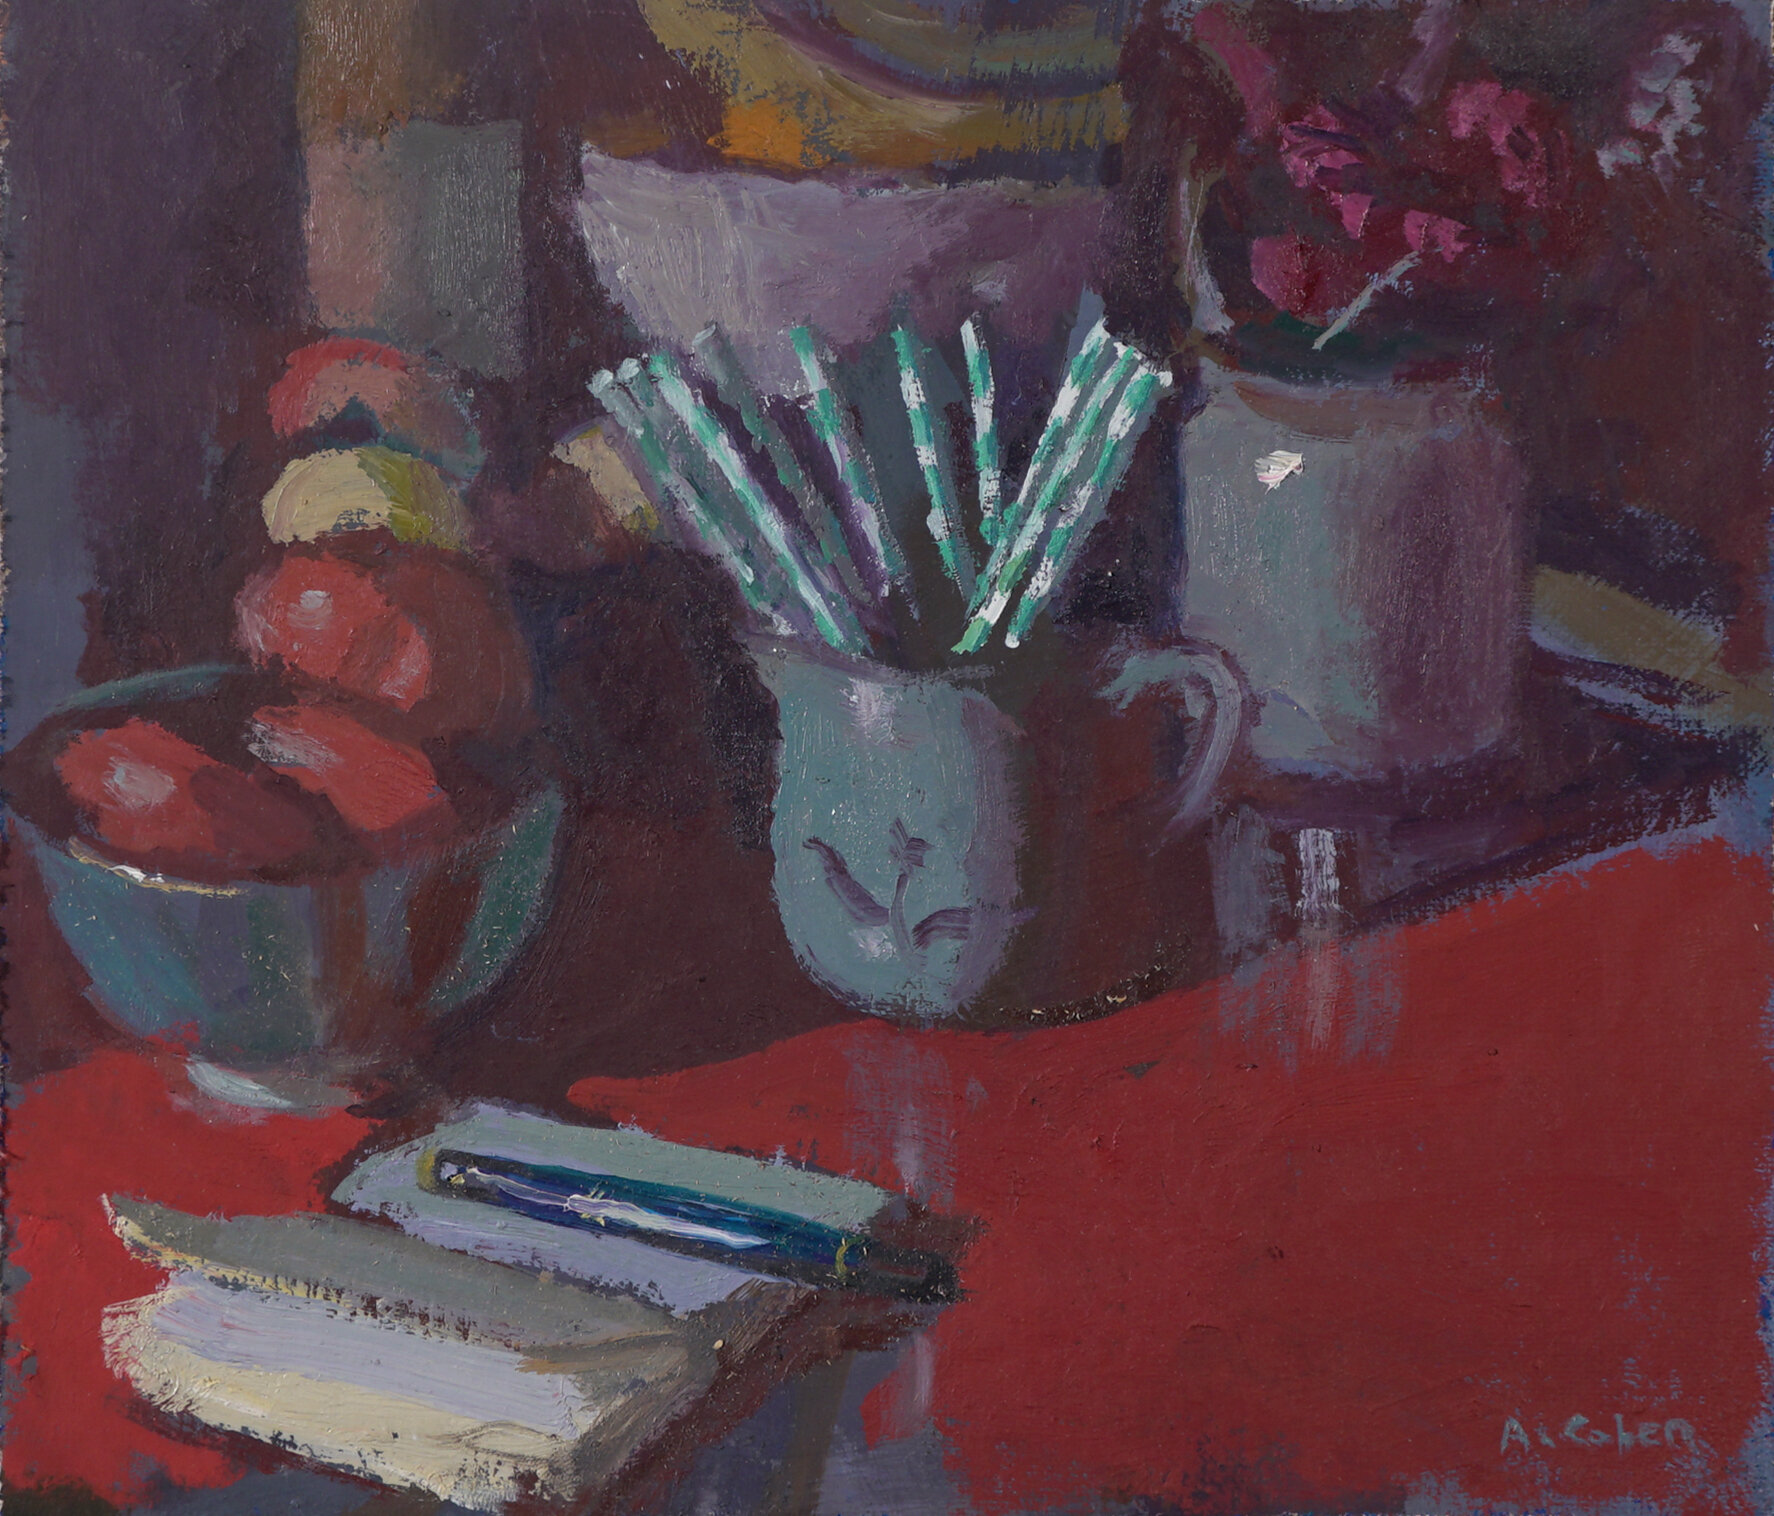 Still Life with Green Straws, Tomatoes and Pen, 12" x 14", Oil on board, 2019 (SOLD)